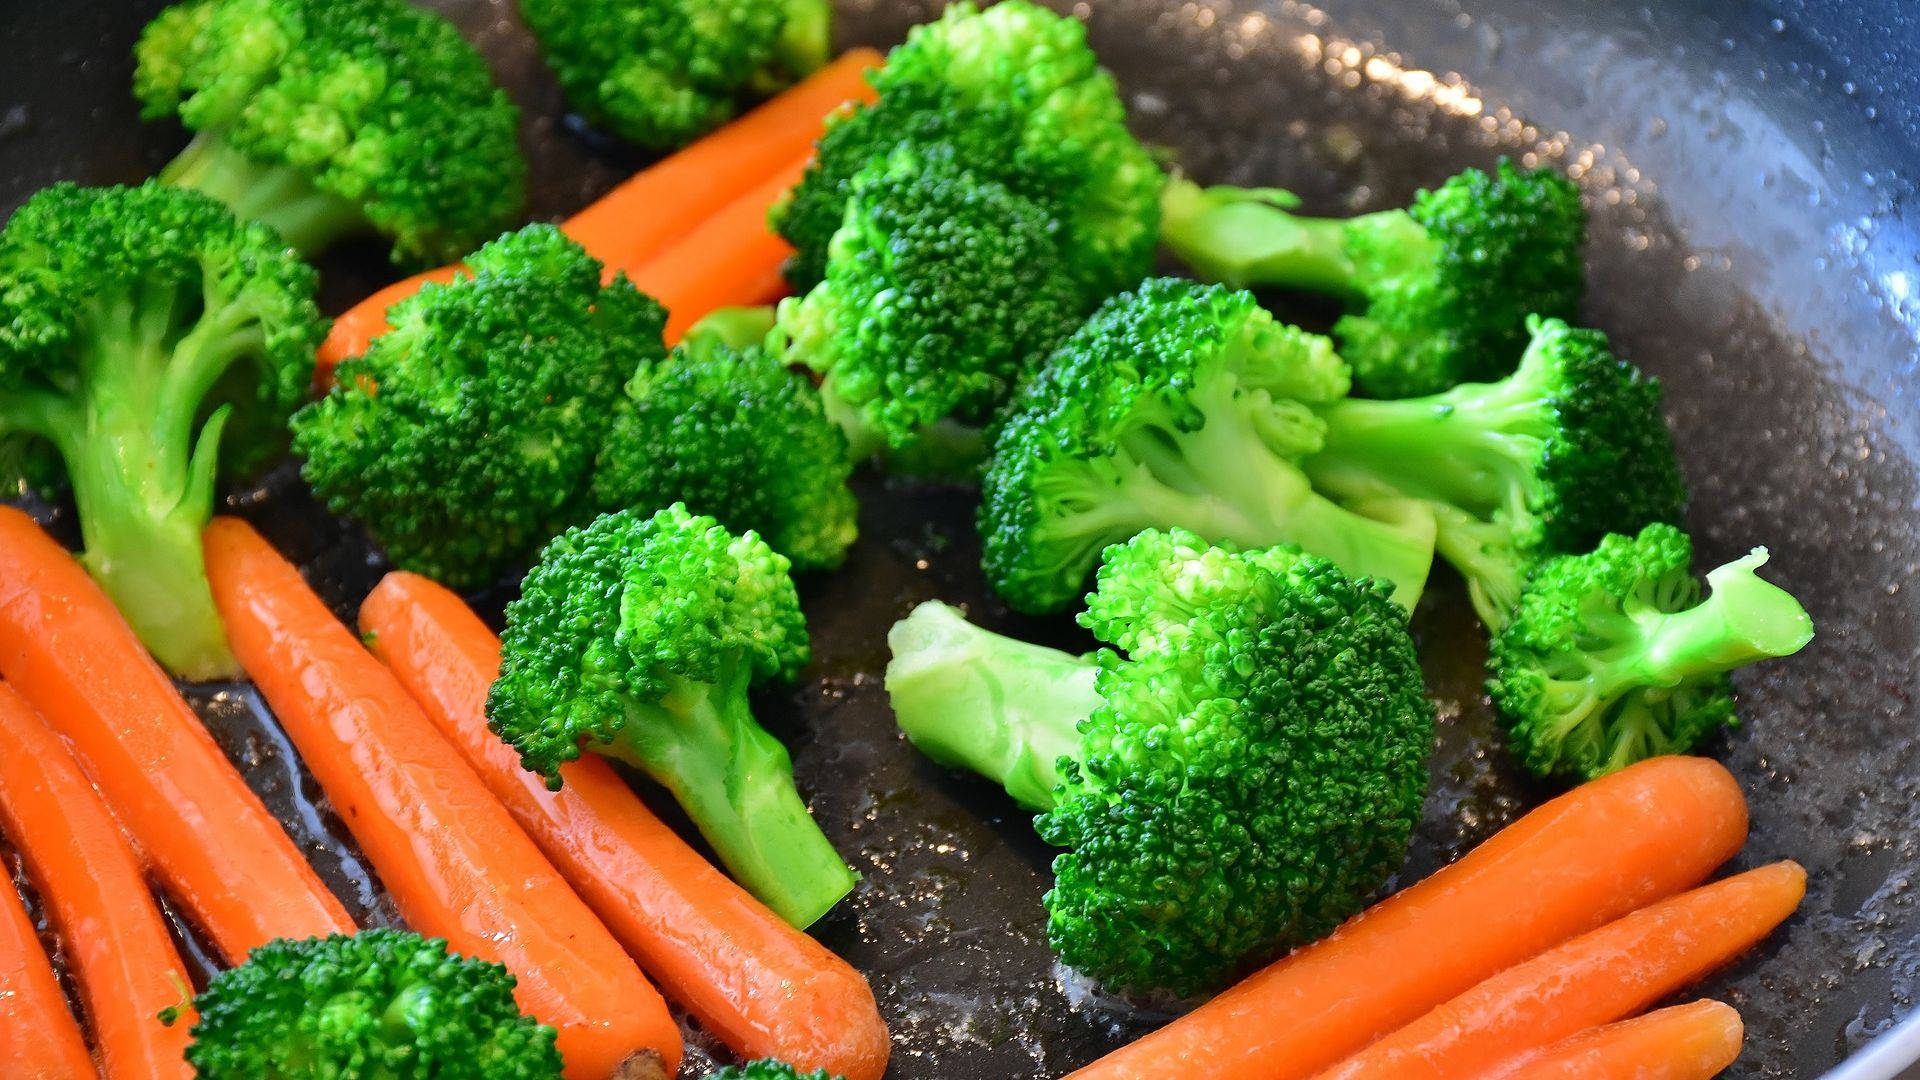 Cooked Green Broccoli And Carrots